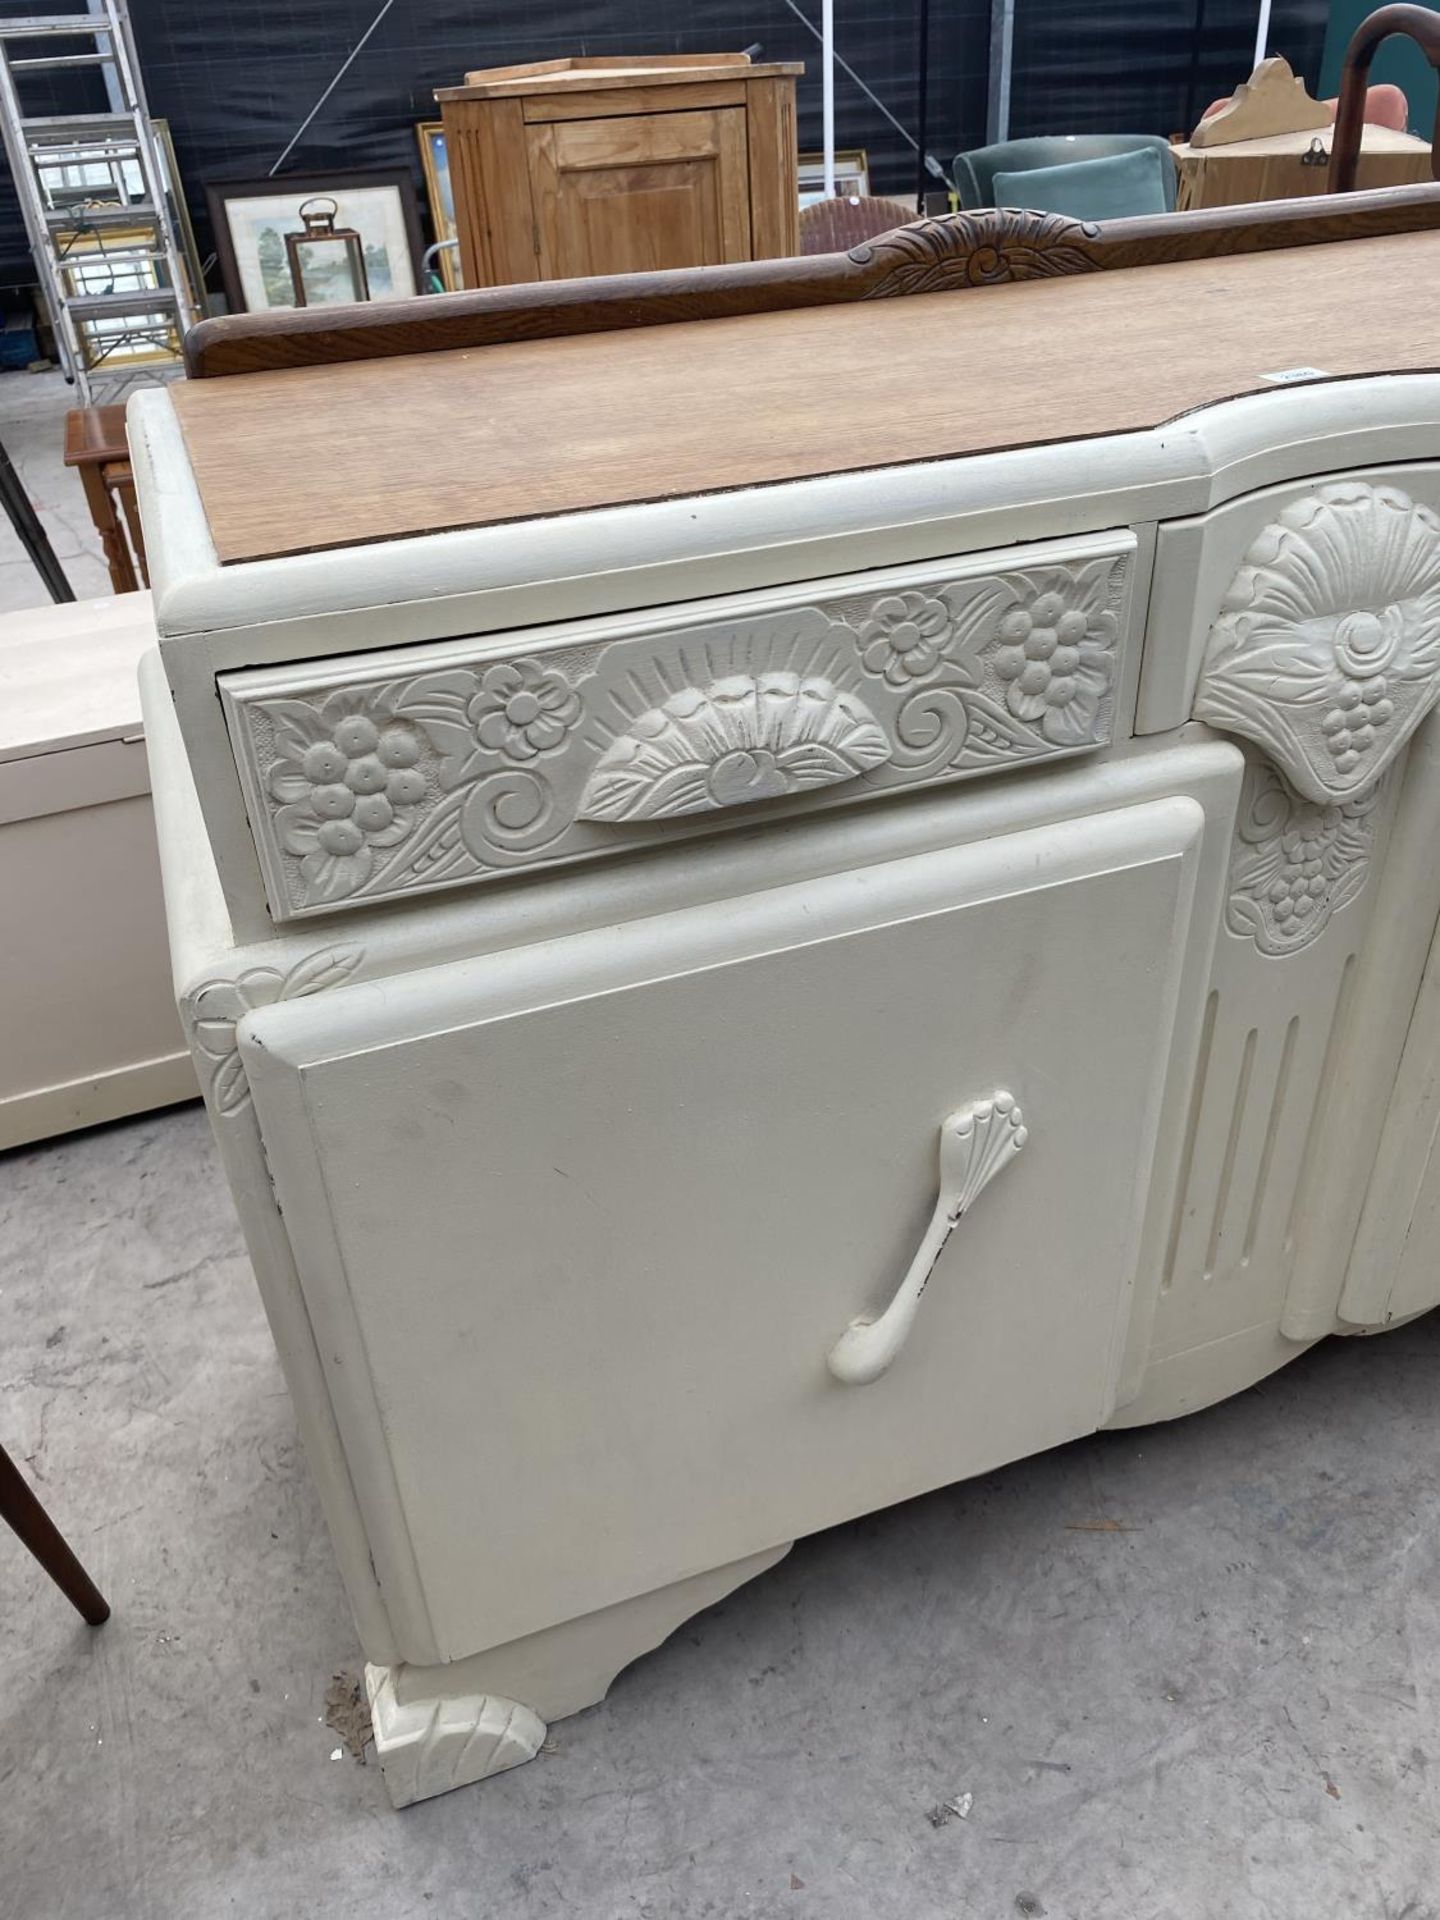 AN EARLY 20TH CENTURY OAK SIDEBOARD WITH SHABBY CHIC PAINTING, 54" WIDE - Image 2 of 4